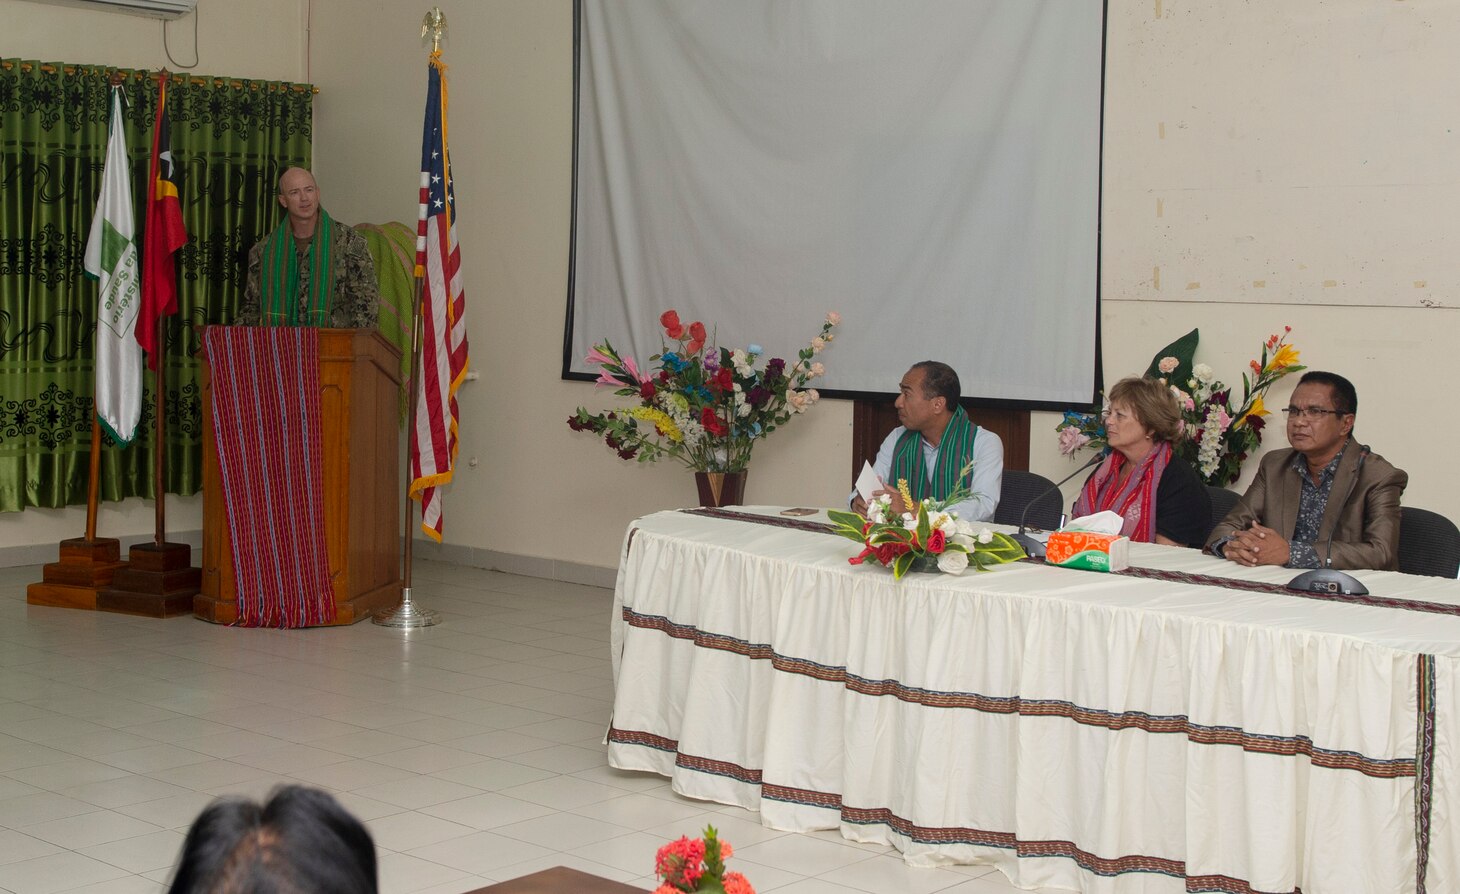 DILI, Timor-Leste (April 24, 2019) – Capt. Randy Van Rossum, Pacific Partnership 2019 mission commander, delivers remarks during a ground-breaking ceremony at the Timor-Leste National Institute of Health. The event marks the start of construction on the facility that will be used to help train Timorese medical professionals in emergency medical response techniques. Pacific Partnership, now in its 14th iteration, is the largest annual multinational humanitarian assistance and disaster relief preparedness mission conducted in the Indo-Pacific. Each year the mission team works collectively with host and partner nations to enhance regional interoperability and disaster response capabilities, increase security and stability in the region, and foster new and enduring friendships in the Indo-Pacific.